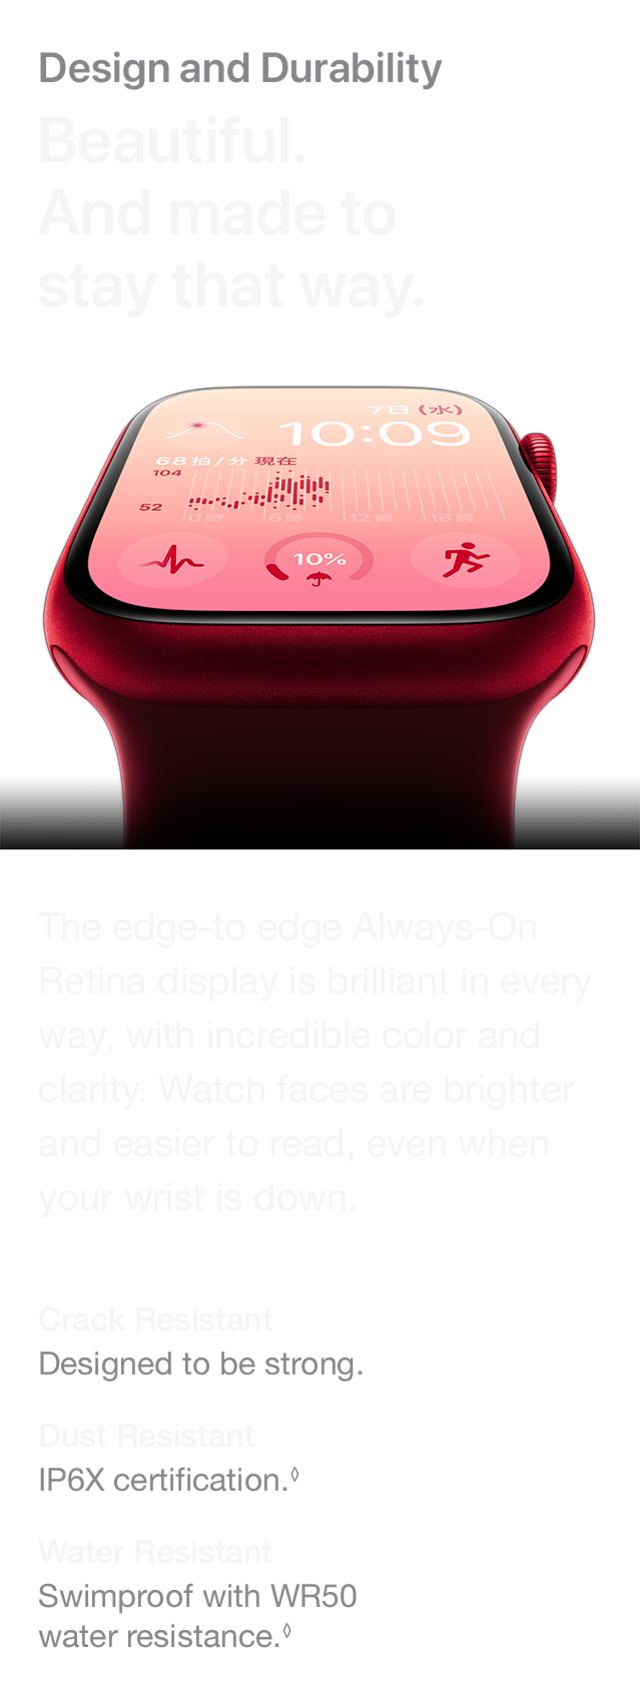 Design and Durability Beautiful. And made to stay that way. The edge-to edge Always-On Retina display is brilliant in every way, with incredible color and clarity. Watch faces are brighter and easier to read, even when your wrist is down. Crack Resistant Designed to be strong. Dust Resistant IP6X certification. Water Resistant Swimproof with WR50 water resistance.